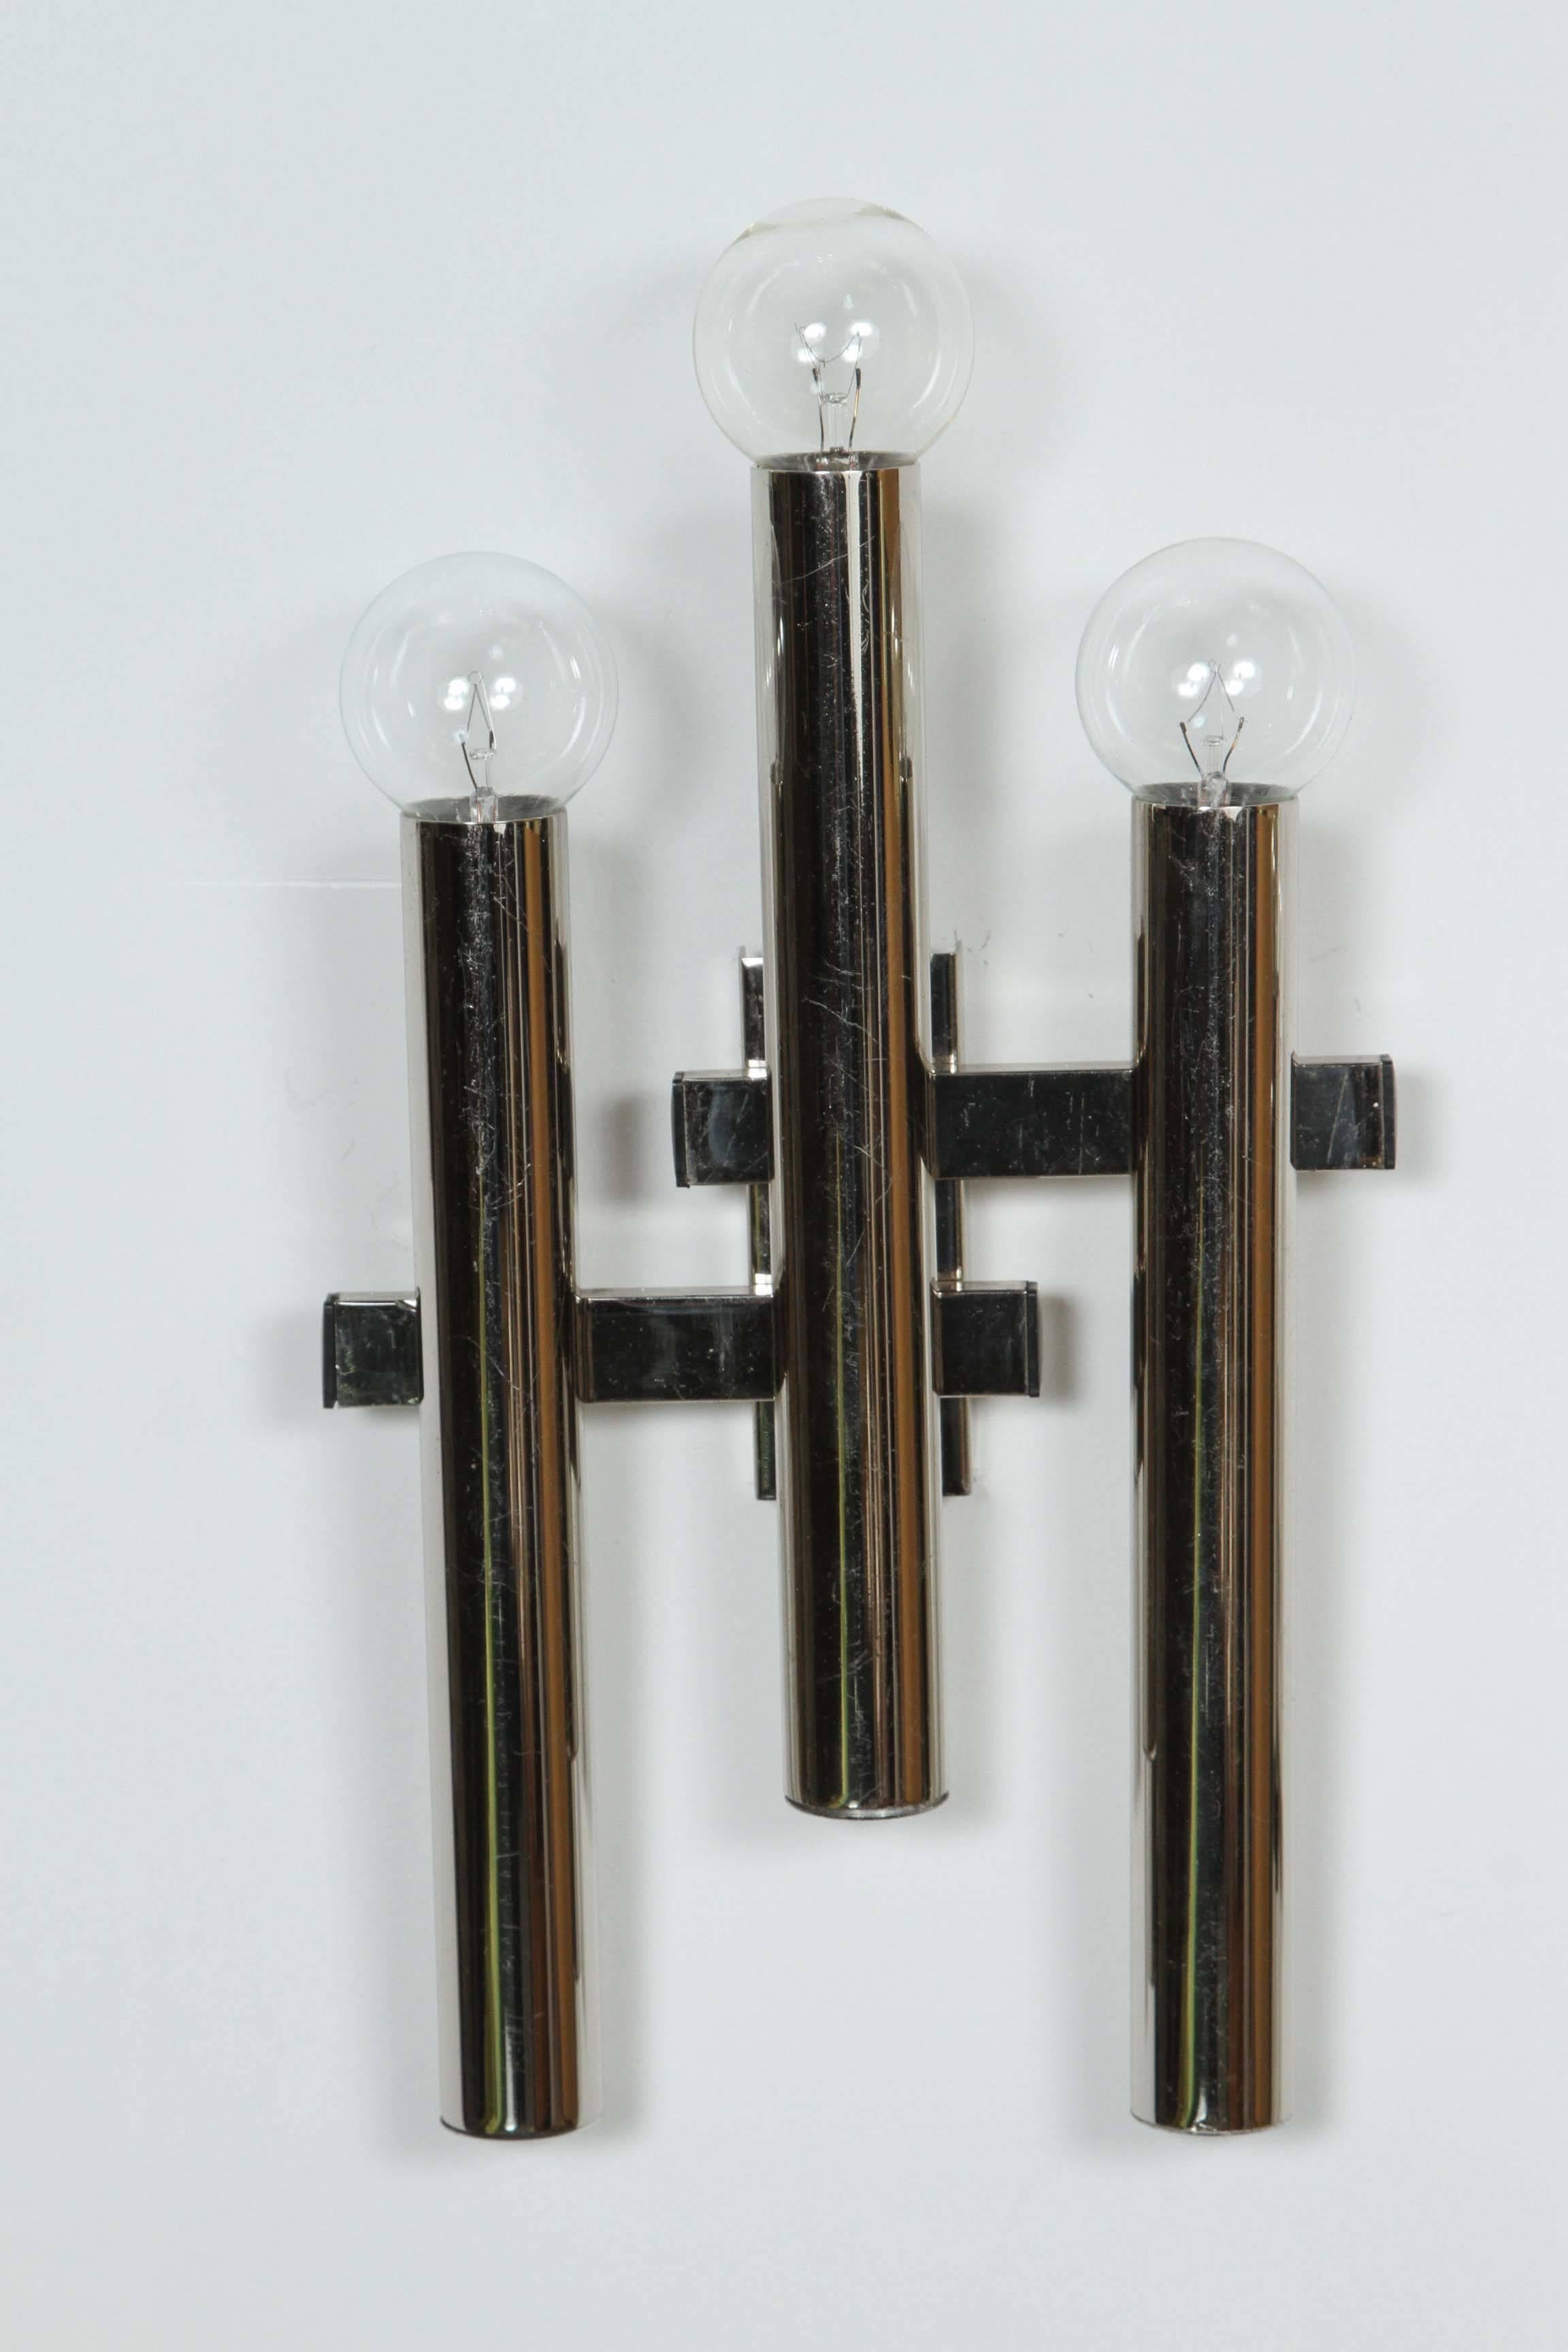 Pair of geometric polished chrome sconces by Sciolari.
The asymmetrical relationship between the two different fixtures is subtle and interesting.
The sconces are in great original condition and are newly rewired for the US and take candelabra